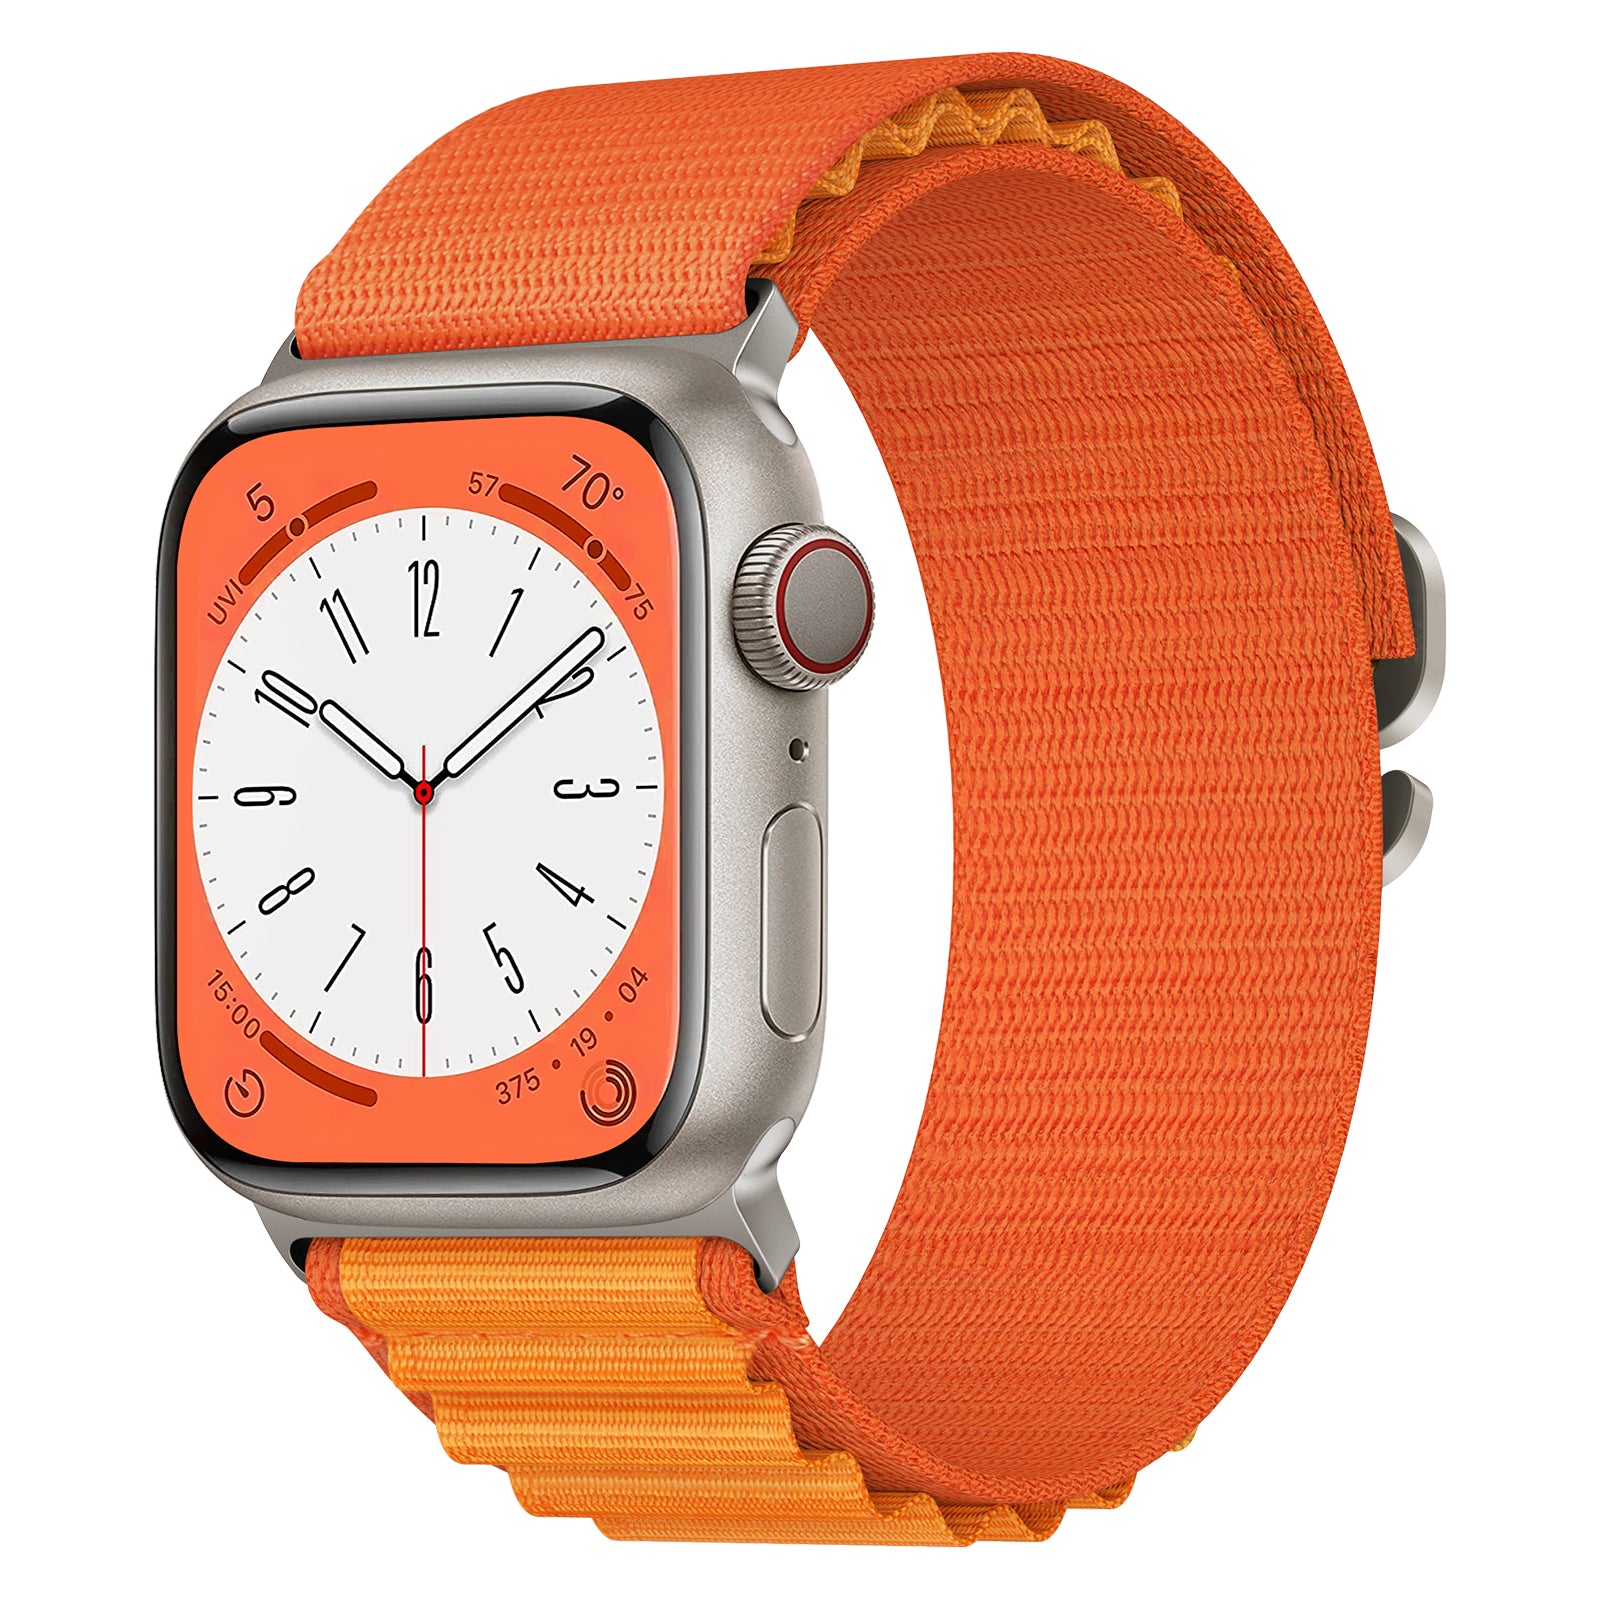 Nylon Alpine Loop band for Apple Watch orange with watch